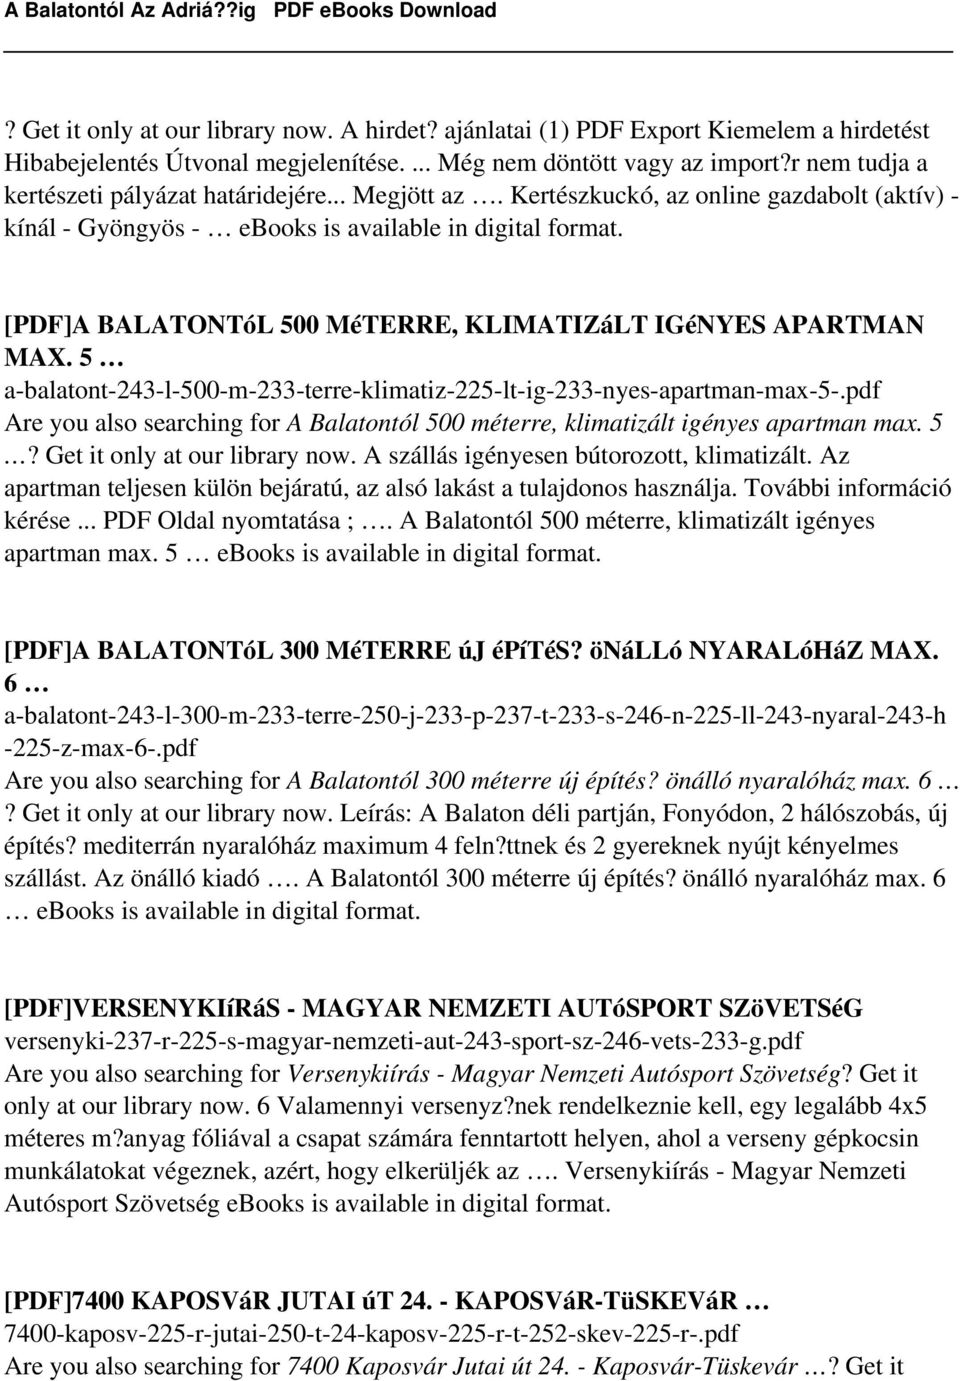 5 a-balatont-243-l-500-m-233-terre-klimatiz-225-lt-ig-233-nyes-apartman-max-5-.pdf Are you also searching for A Balatontól 500 méterre, klimatizált igényes apartman max. 5? Get it only at our library now.